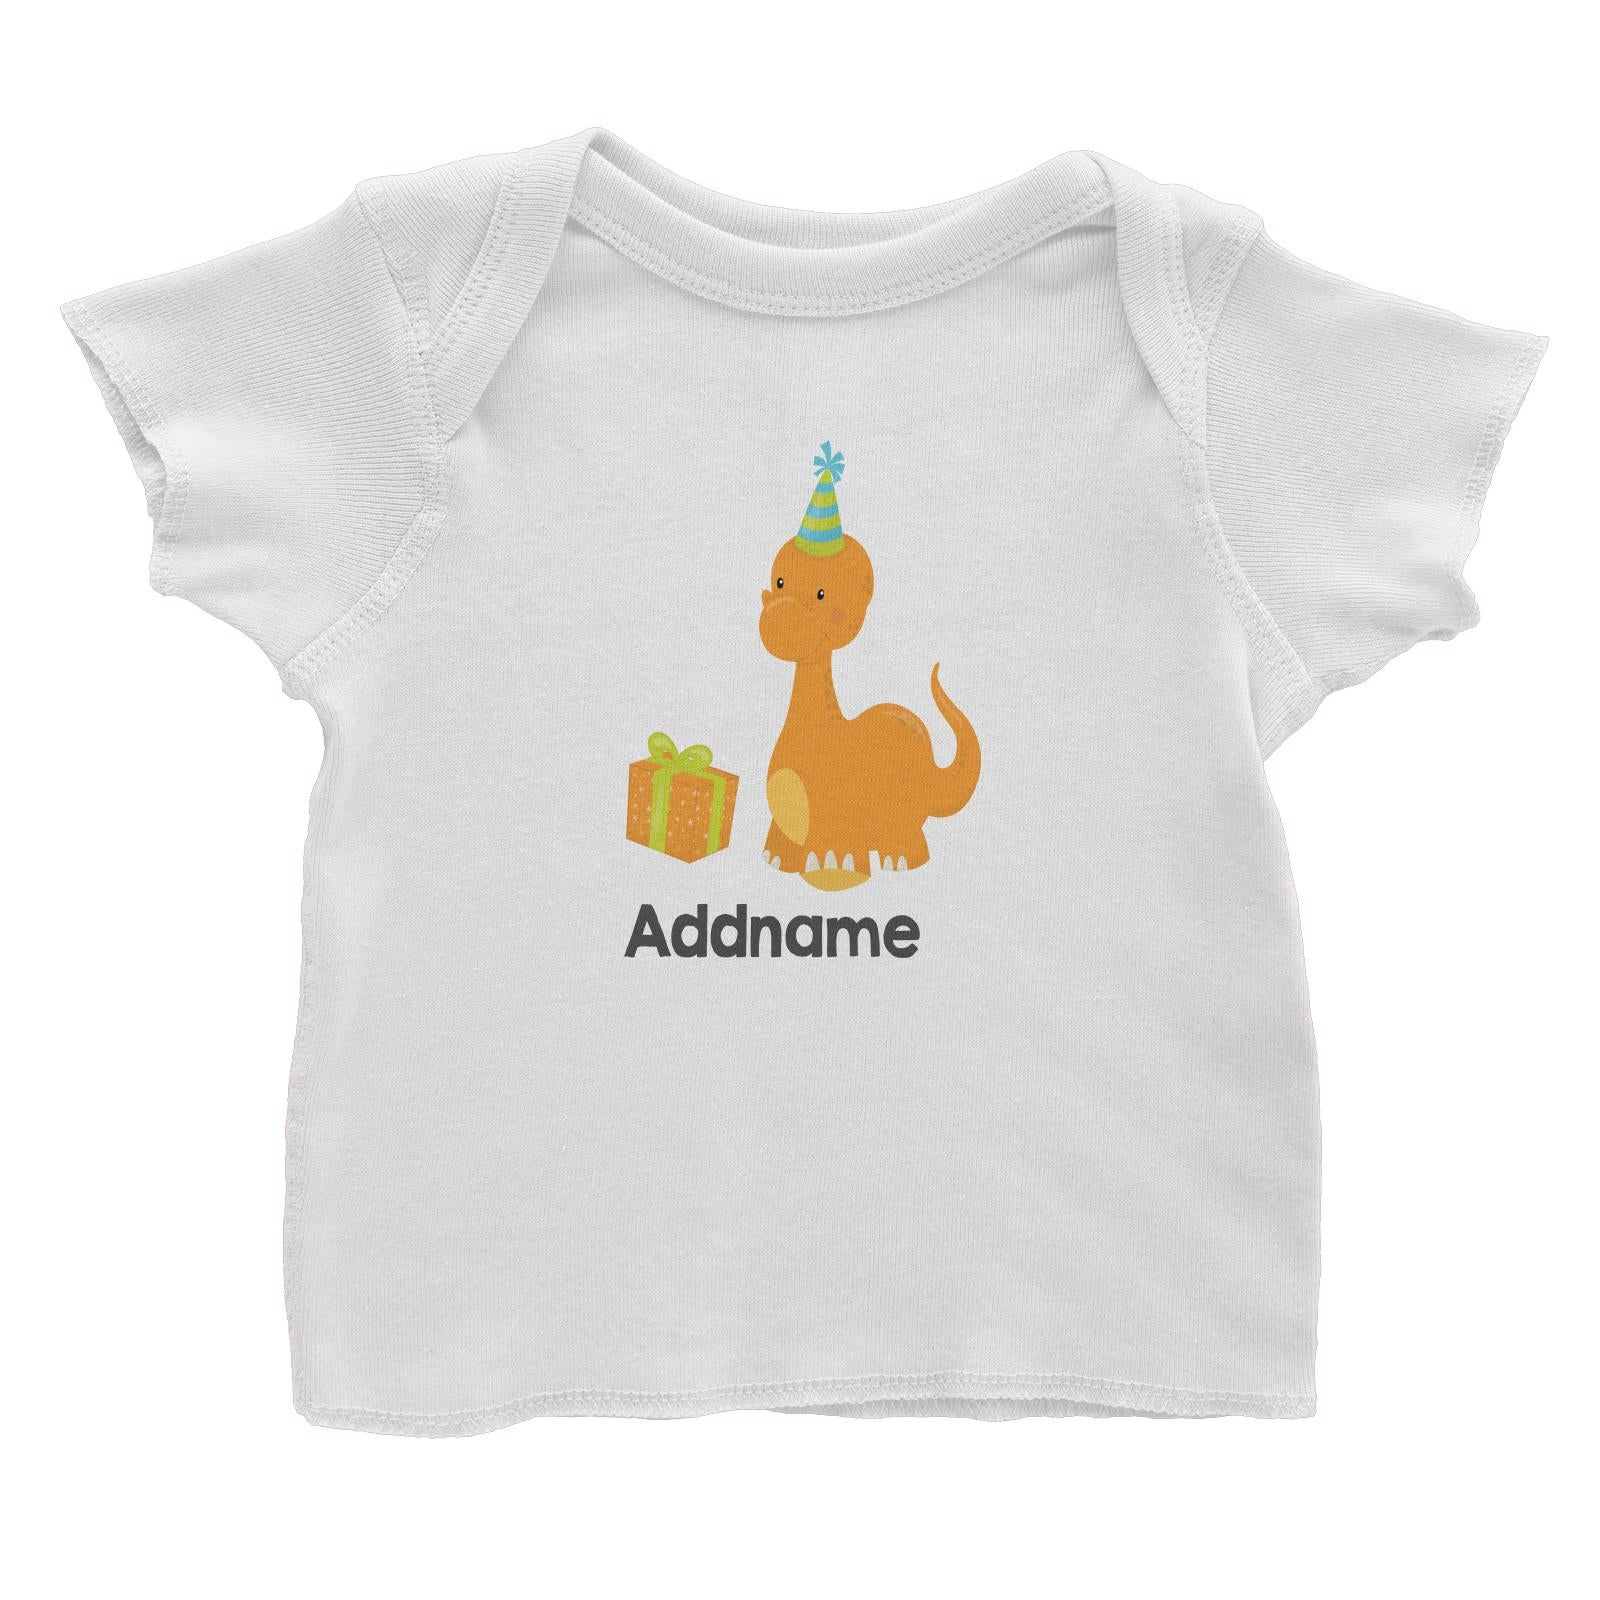 Dino Birthday Orange Long Neck WIth Birthday Gift and Hat Addname Baby T-Shirt